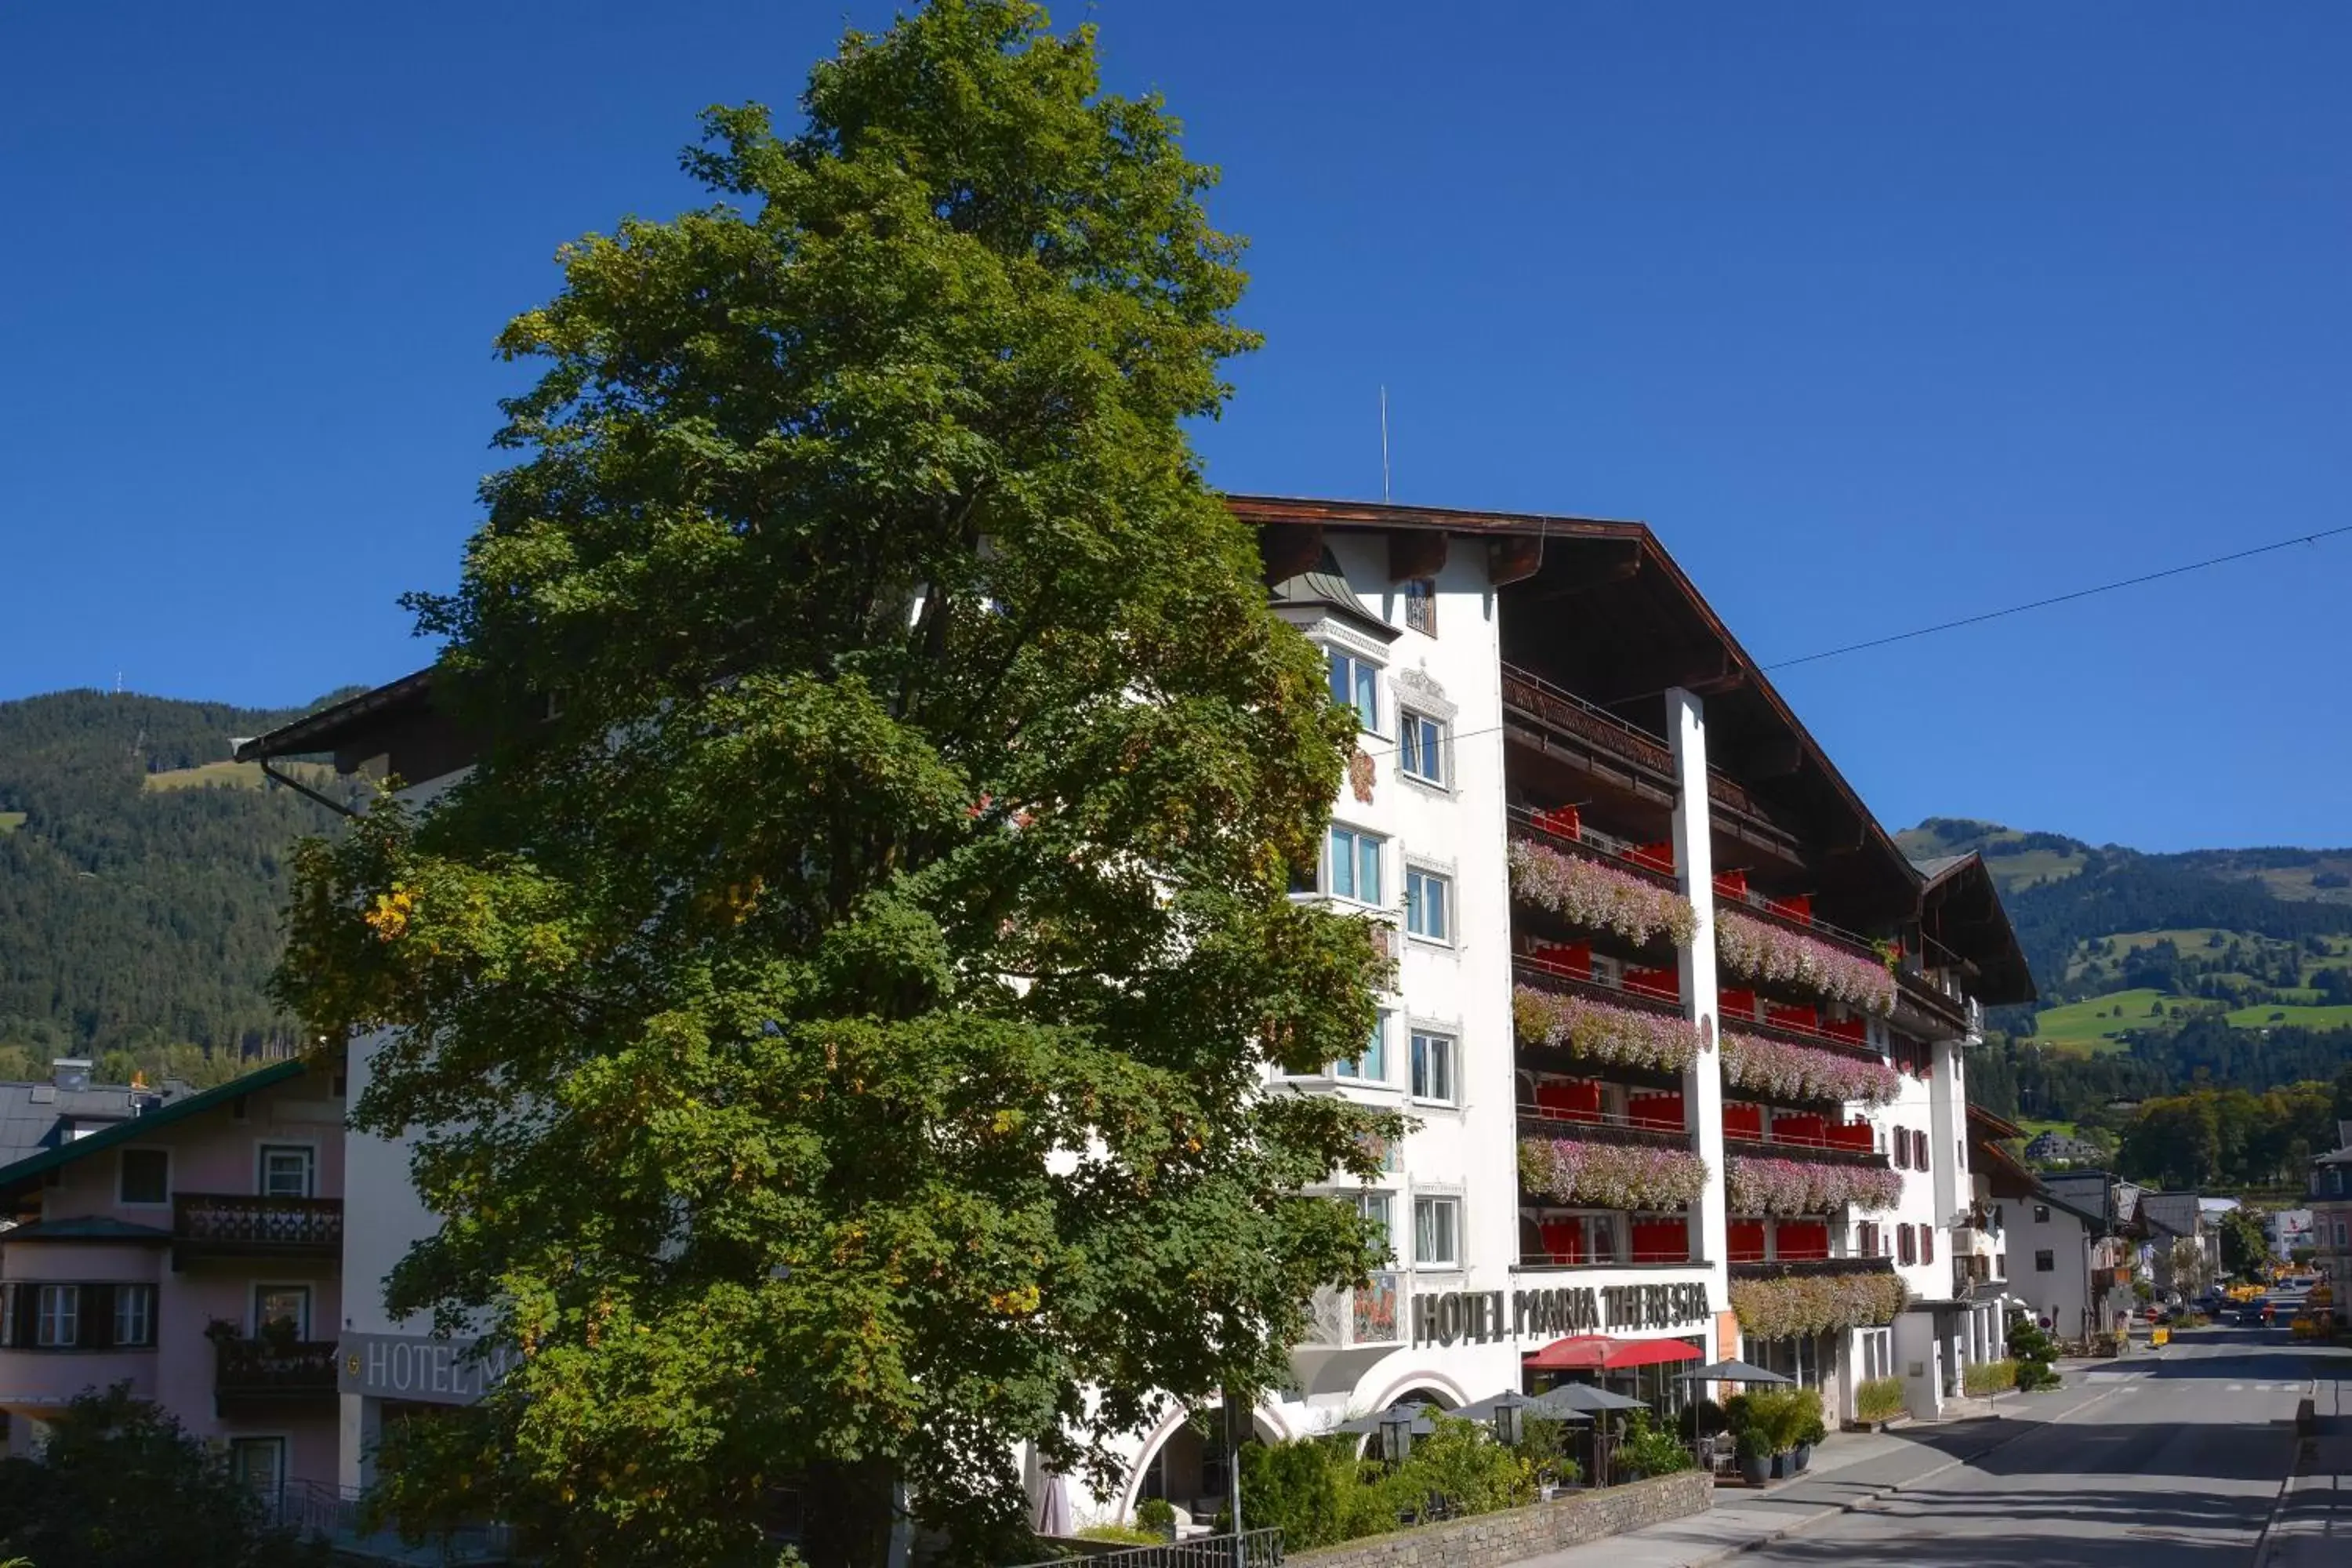 Property Building in Q! Hotel Maria Theresia